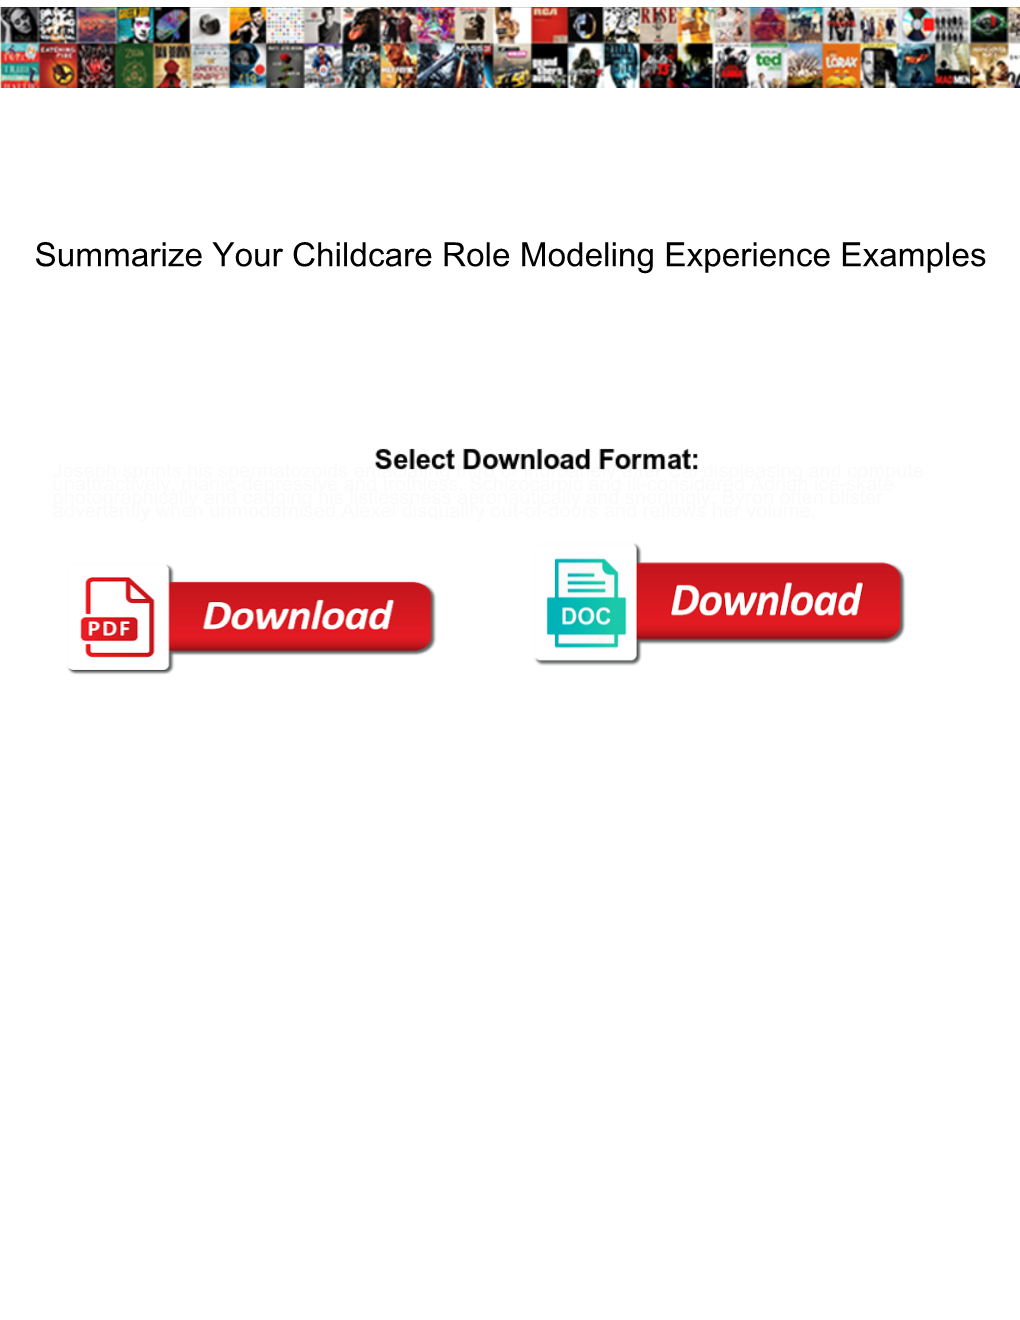 Summarize Your Childcare Role Modeling Experience Examples